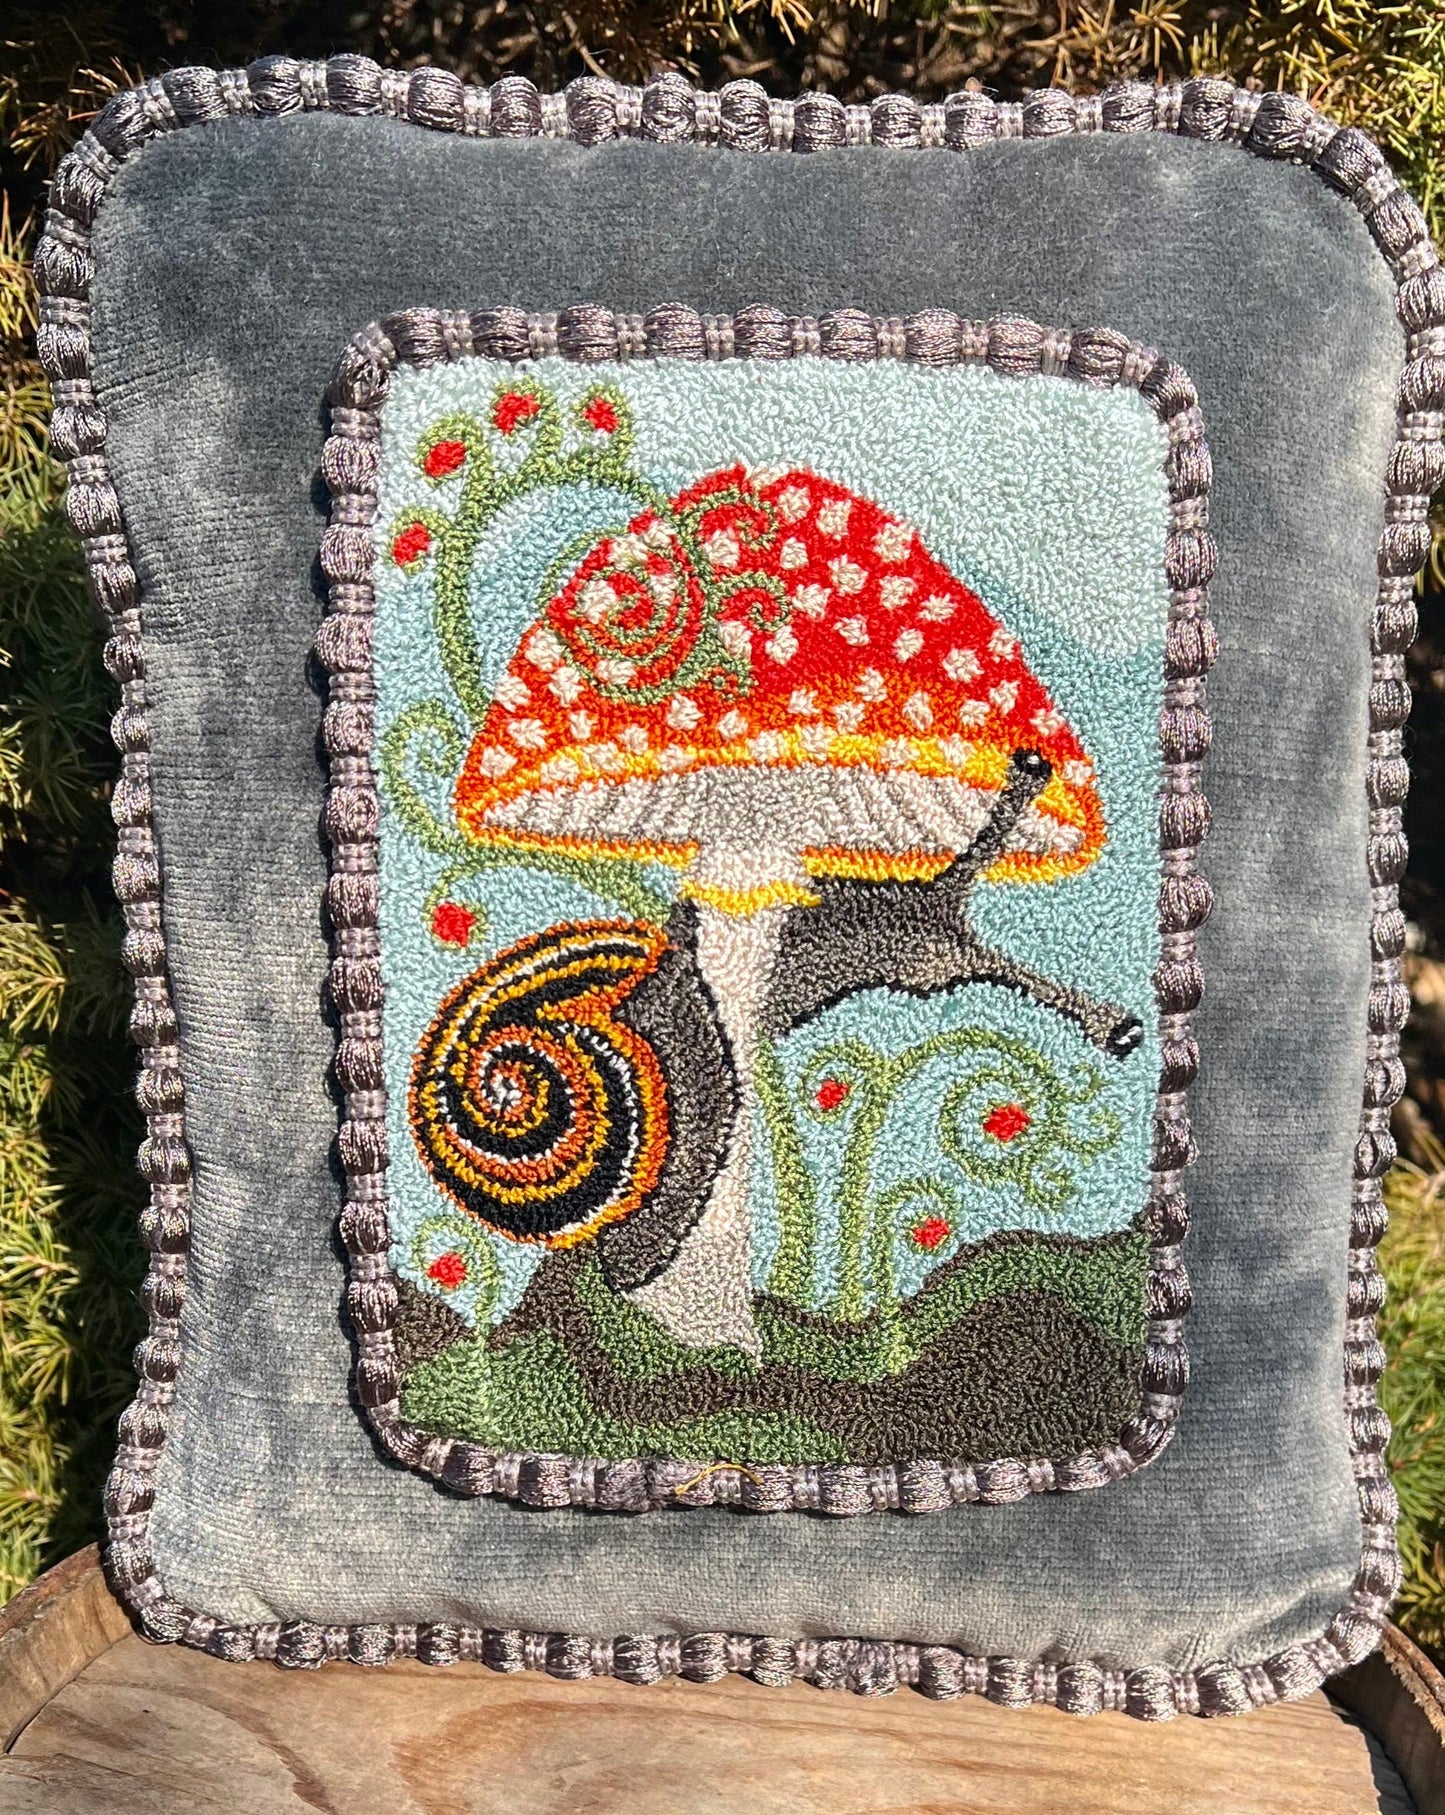  The Pattern Entwined is a punch Needle Embroidery pattern that used thread and a punch needle to create the design. Entwinted design depicts a snail wrapping itself around a colorful mushroom. Copyright © 2024 Kelly Kanyok of Orphaned Wool.